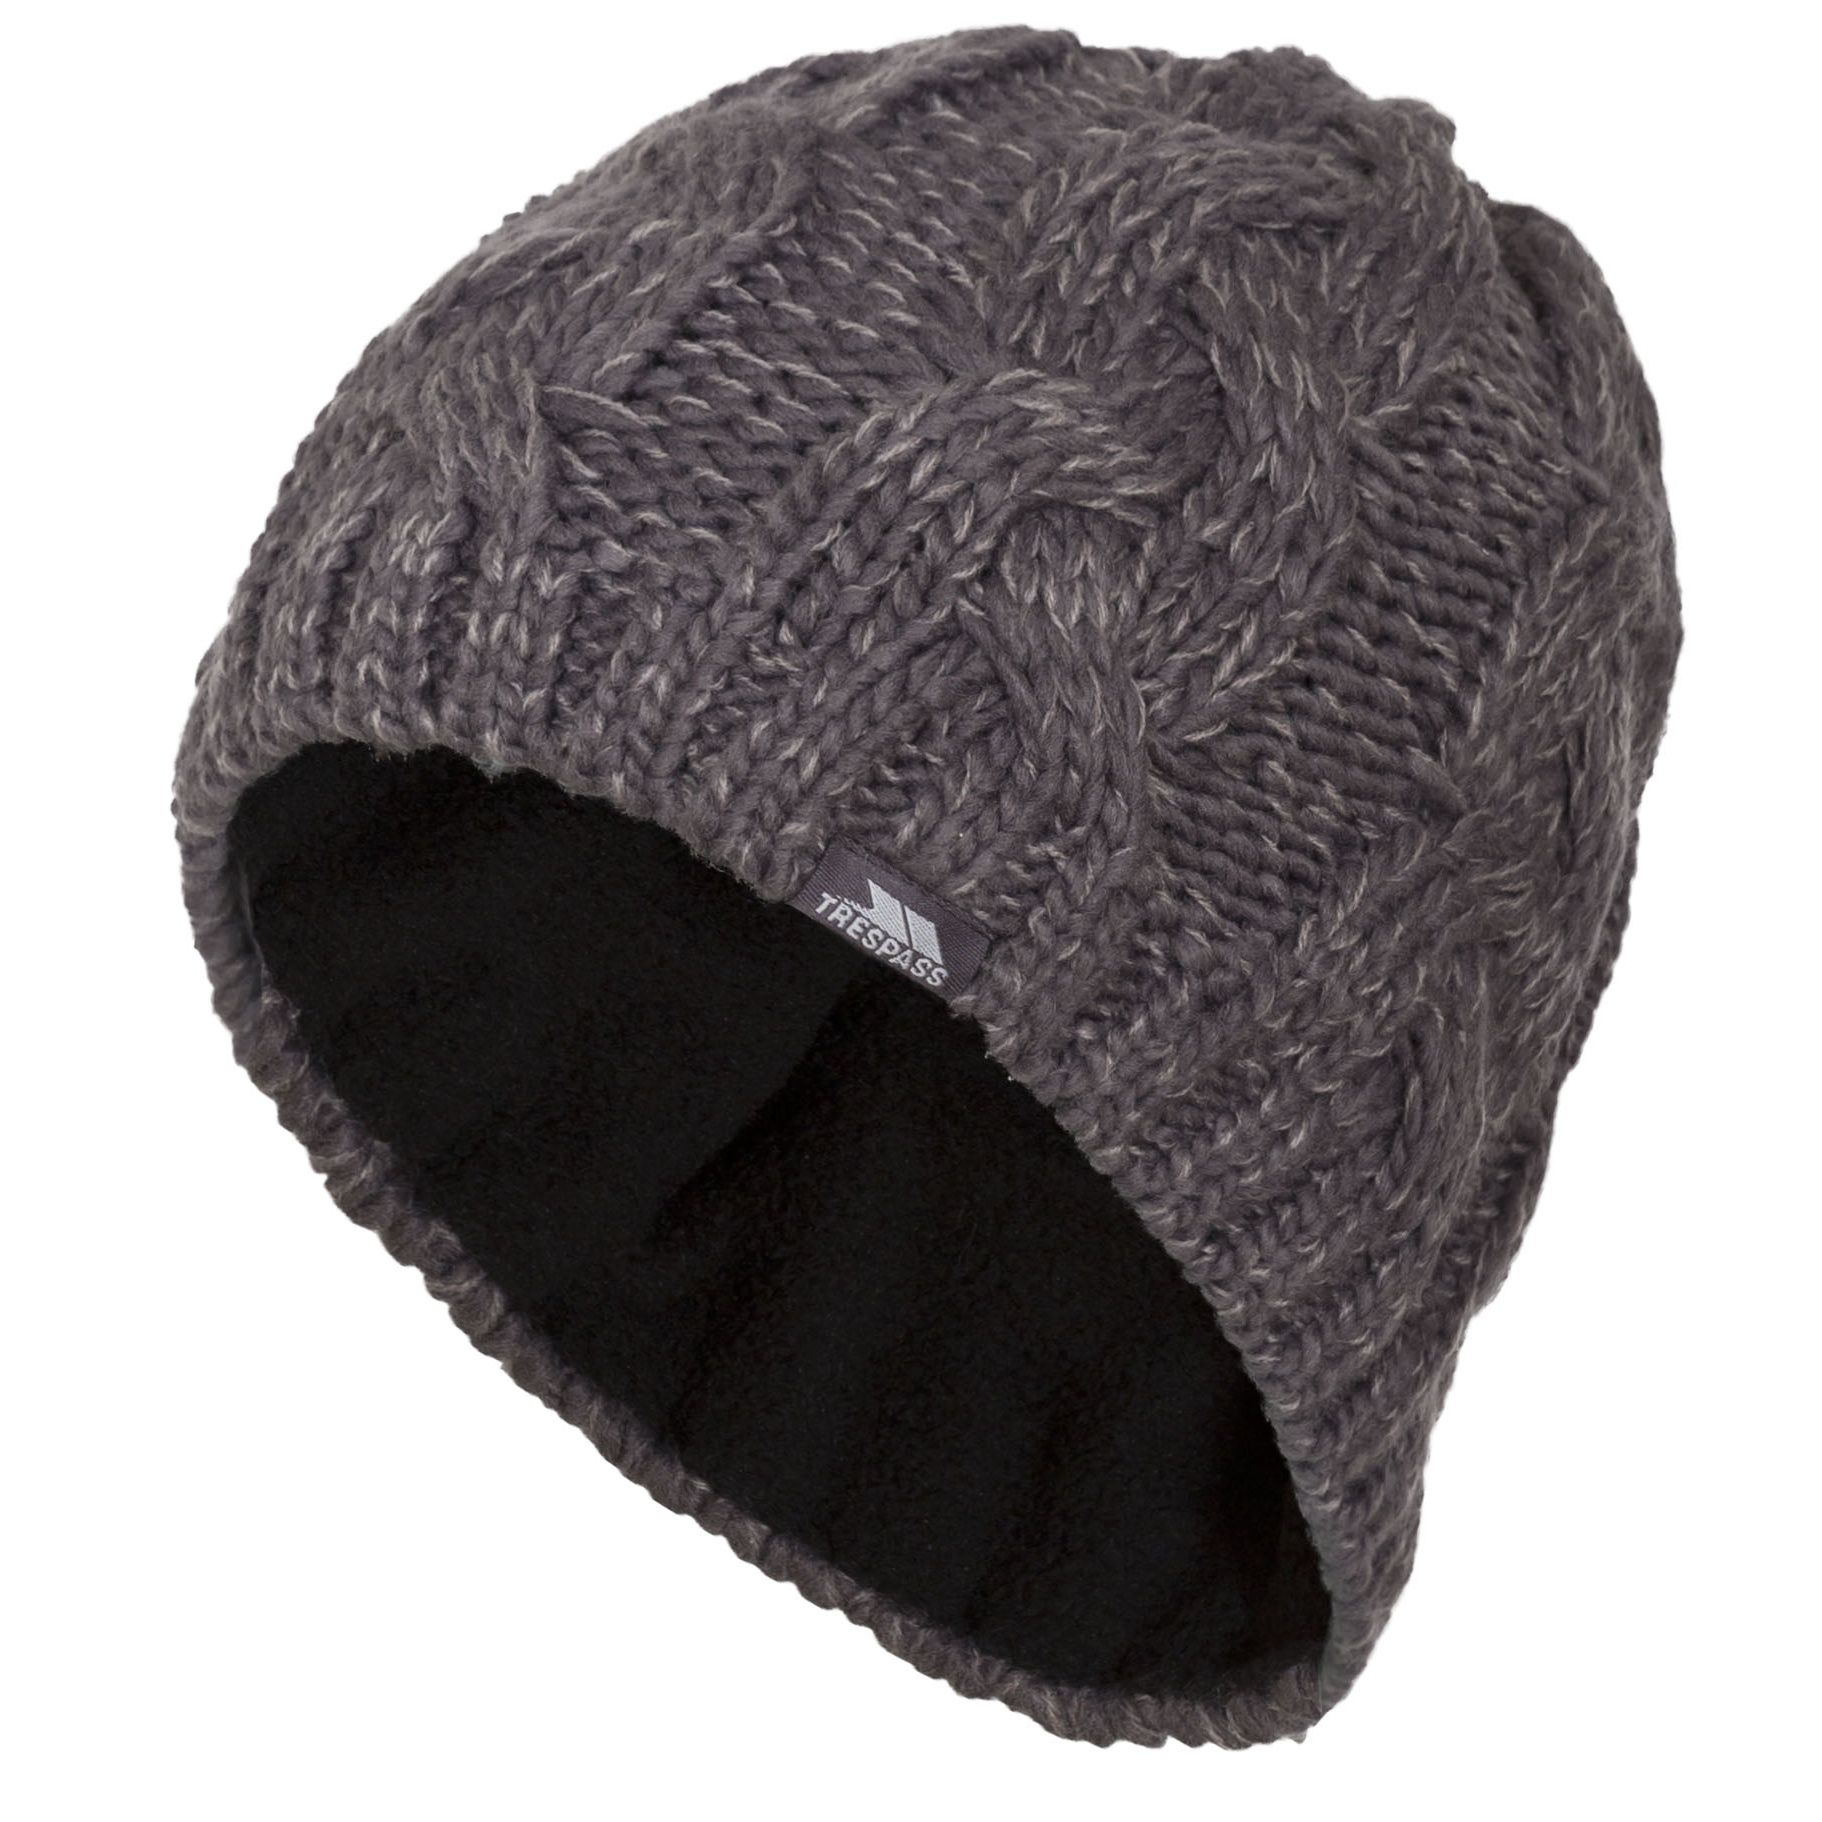 The Tomlins mens knitted beanie hat will enable you to head out into wintry weather knowing you`ll be properly protected against the cold. Half fleece lined. Knitted beanie hat. Woven label. Material: Outer: 100% Acrylic. Lining: 100% Polyester anti pil fleece.